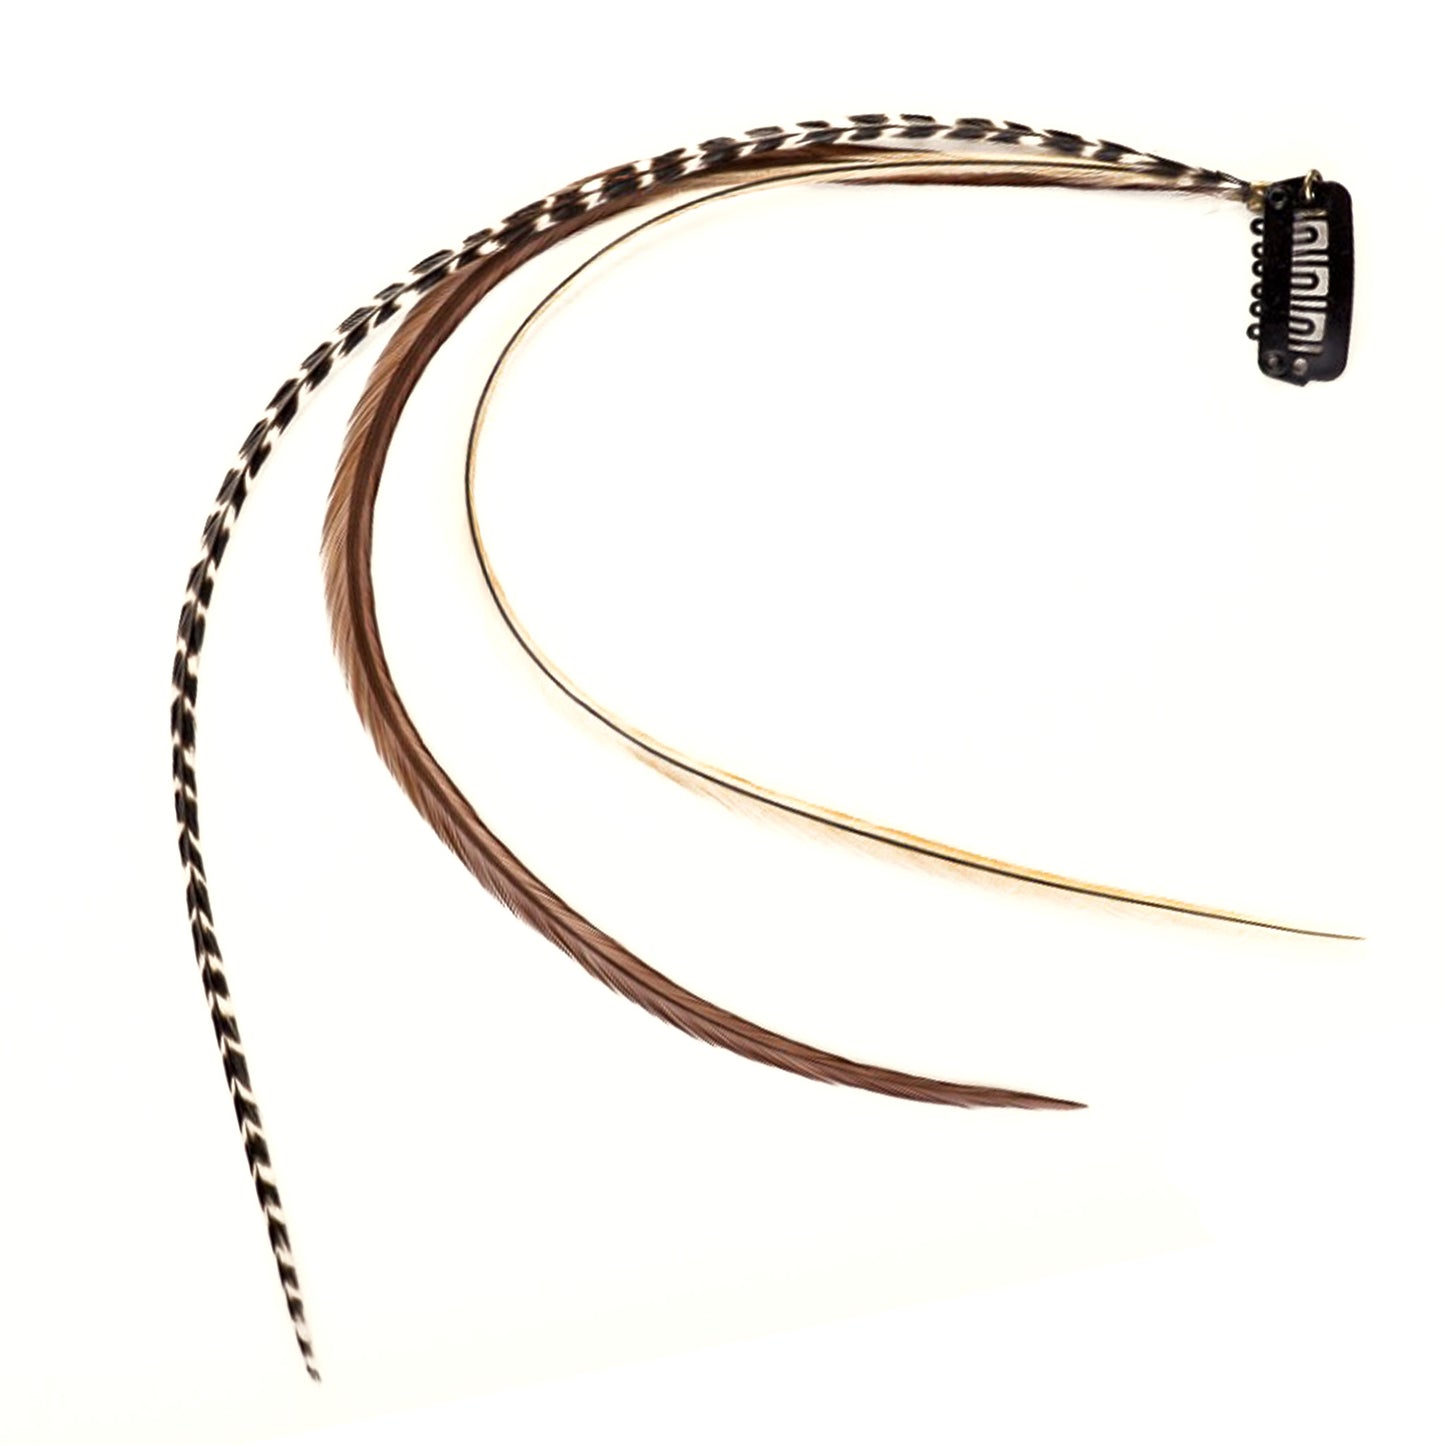 Feather extensions - 3 feathers - Caramel